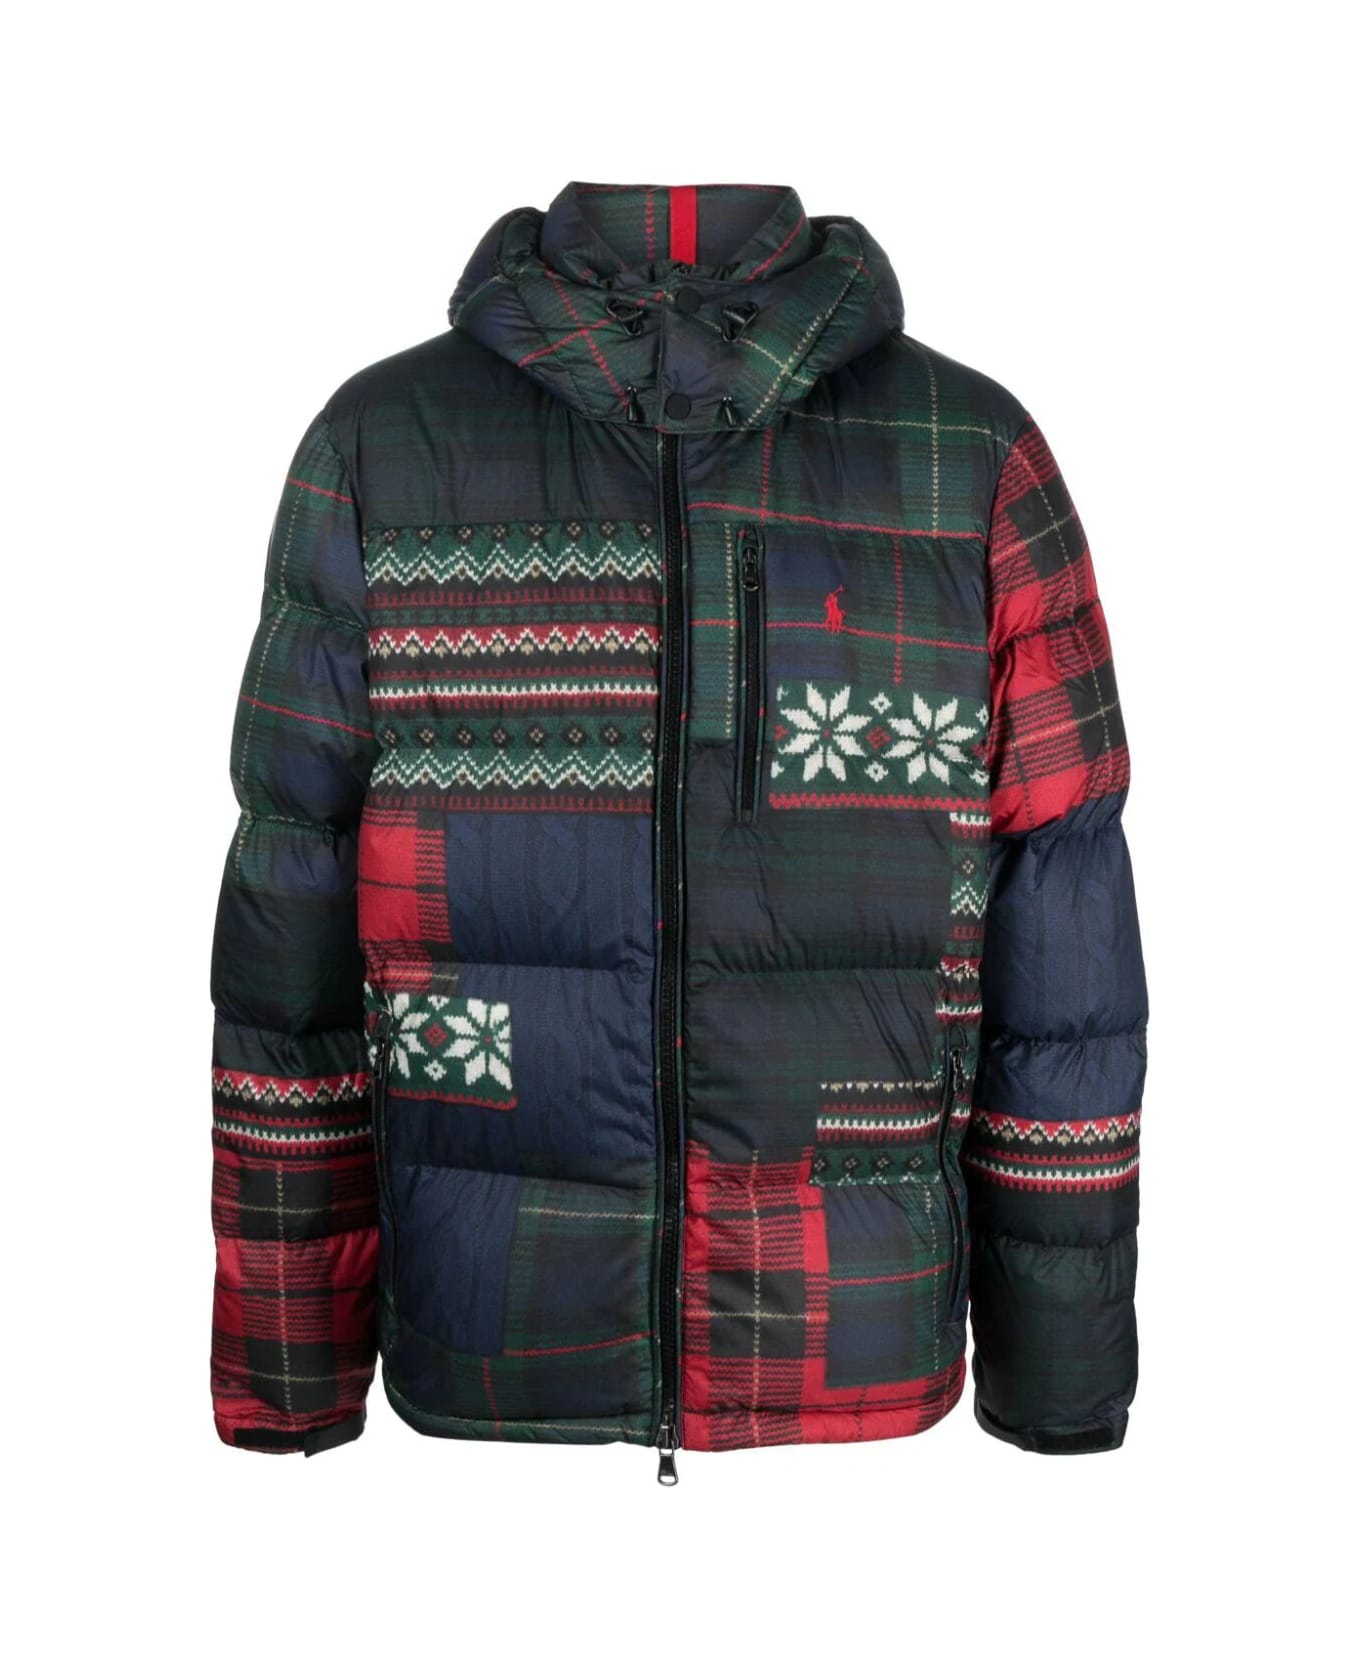 Polo Ralph Lauren Ripstop Insulated Bomber Jacket - Patchwork Print